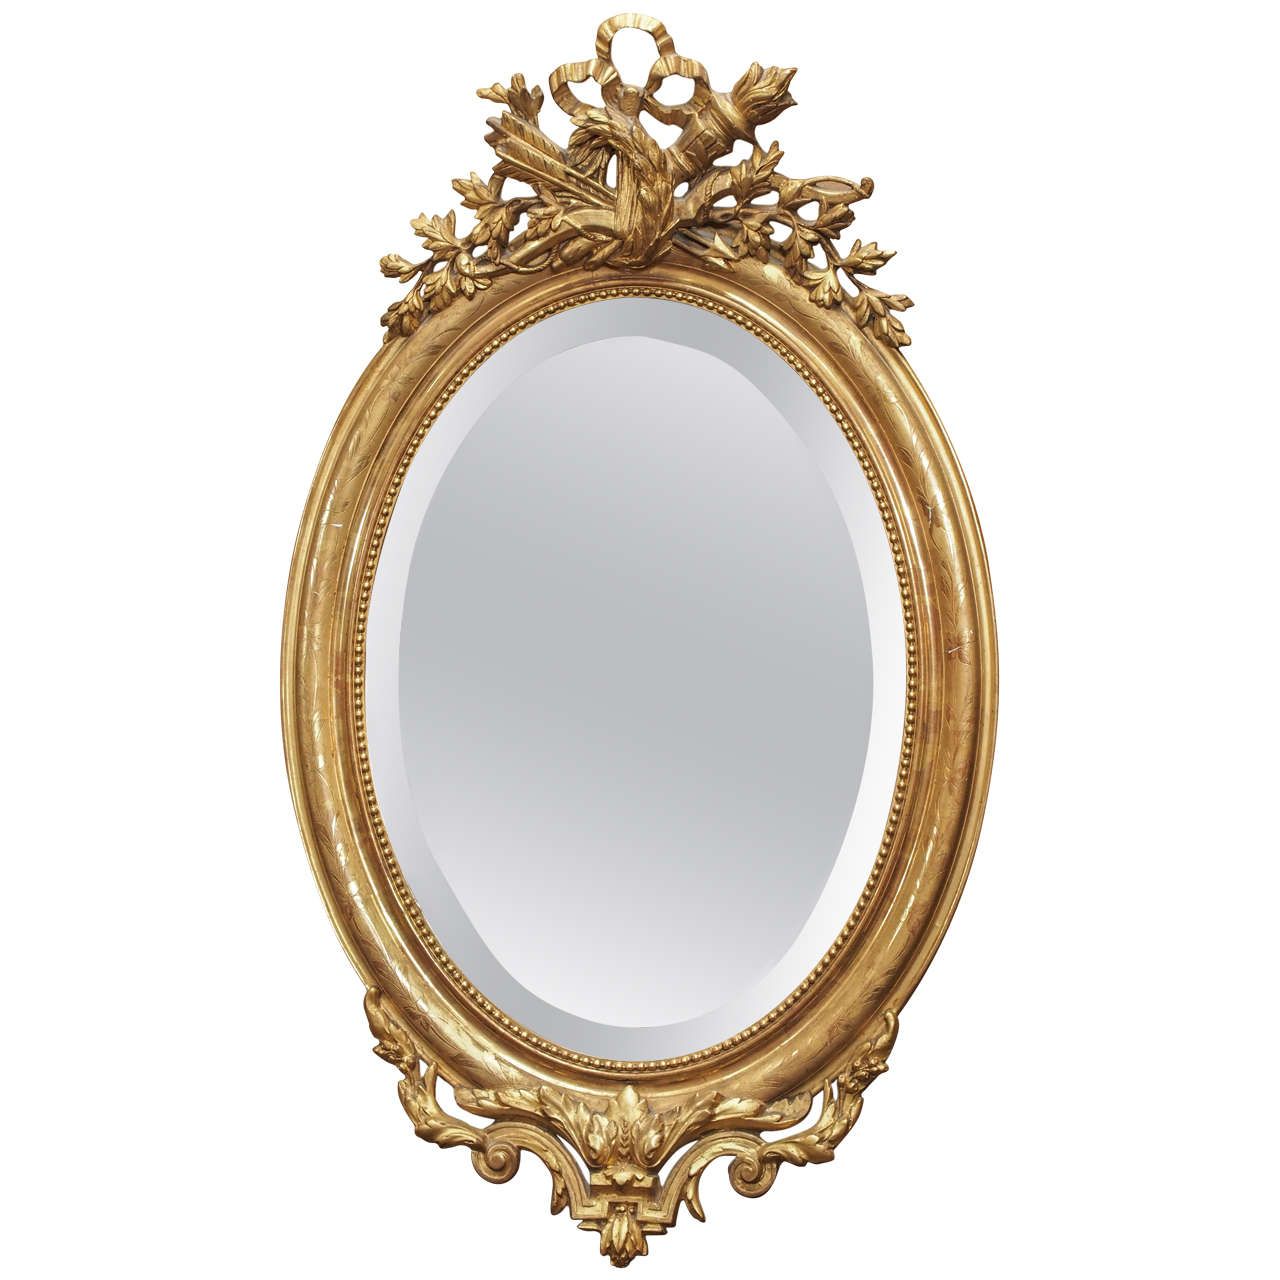 Lovely Oval Antique French Gold Beveled Mirror Circa 1850 At 1stdibs Regarding Trendy Antique Gold Cut Edge Wall Mirrors (View 10 of 15)